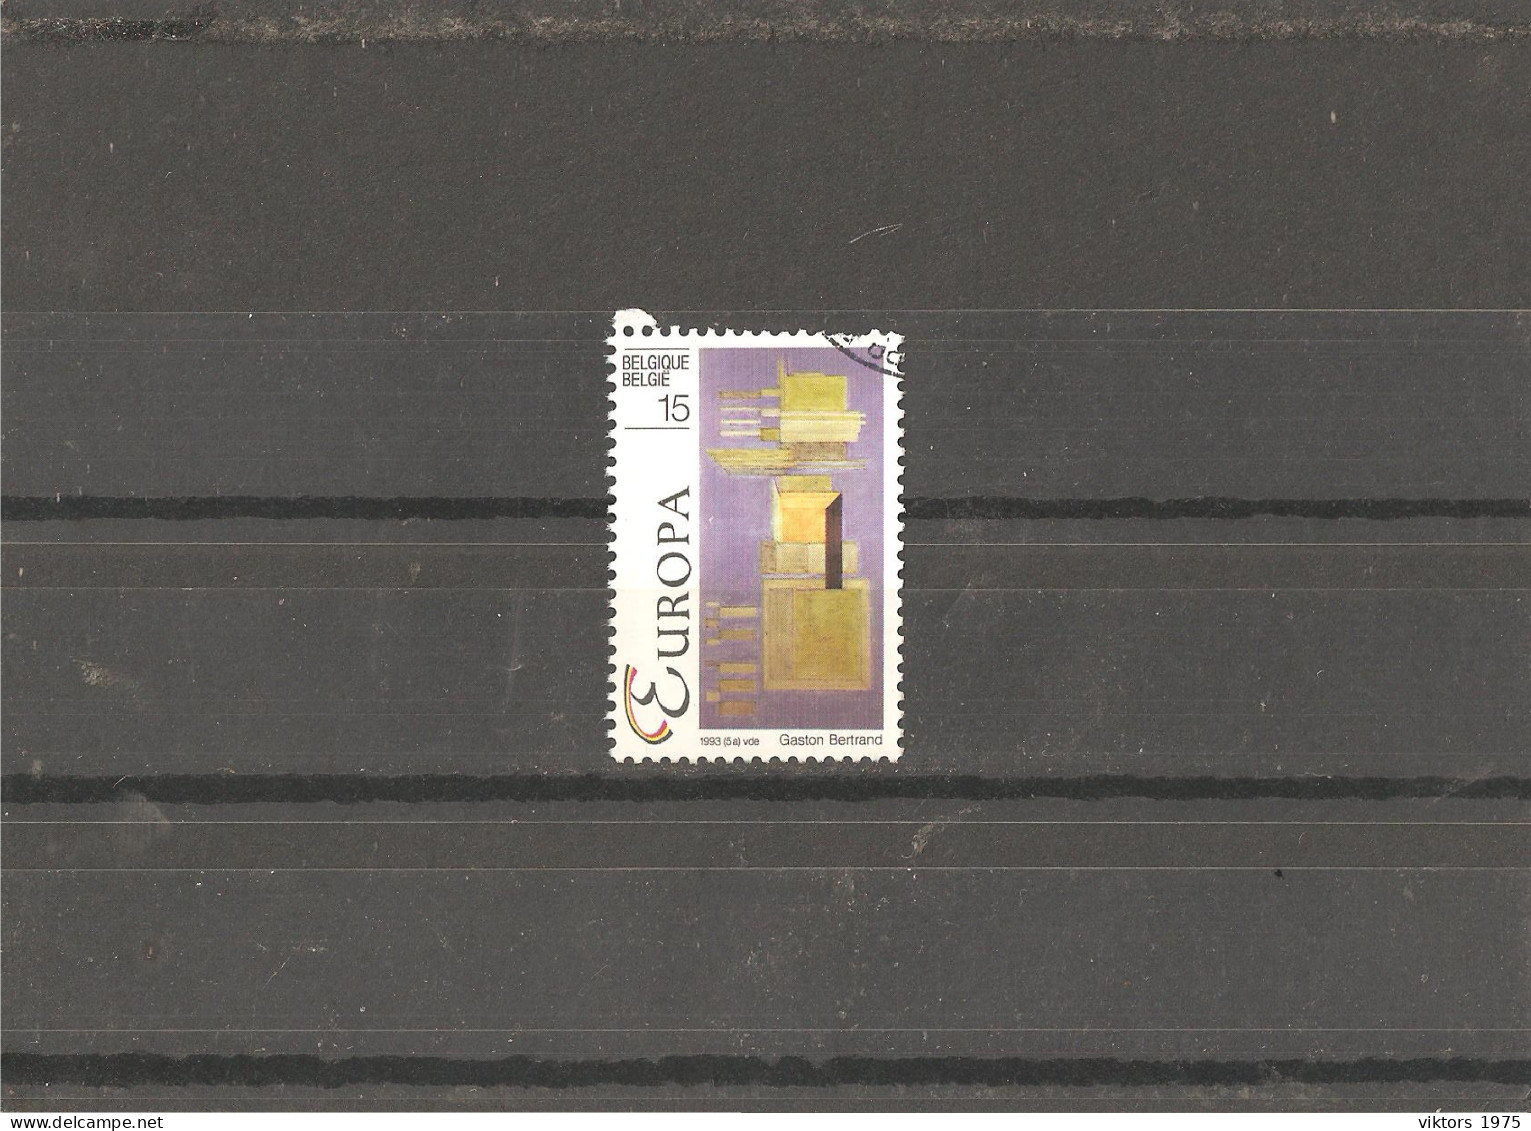 Used Stamp Nr.2553 In MICHEL Catalog - Used Stamps